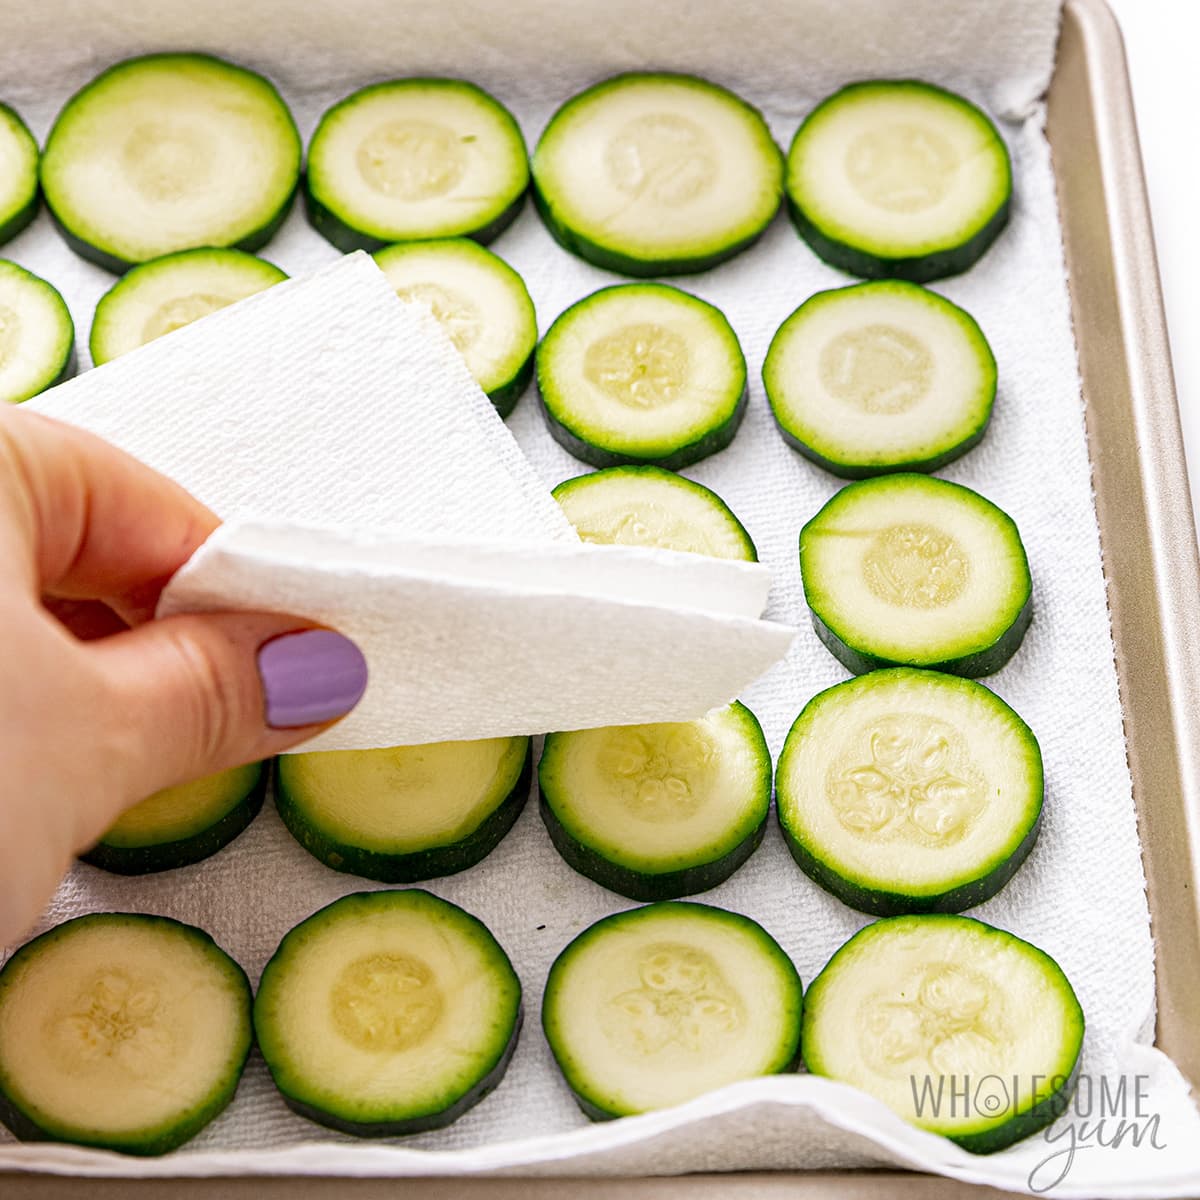 Zucchini slices patted dry with paper towel.